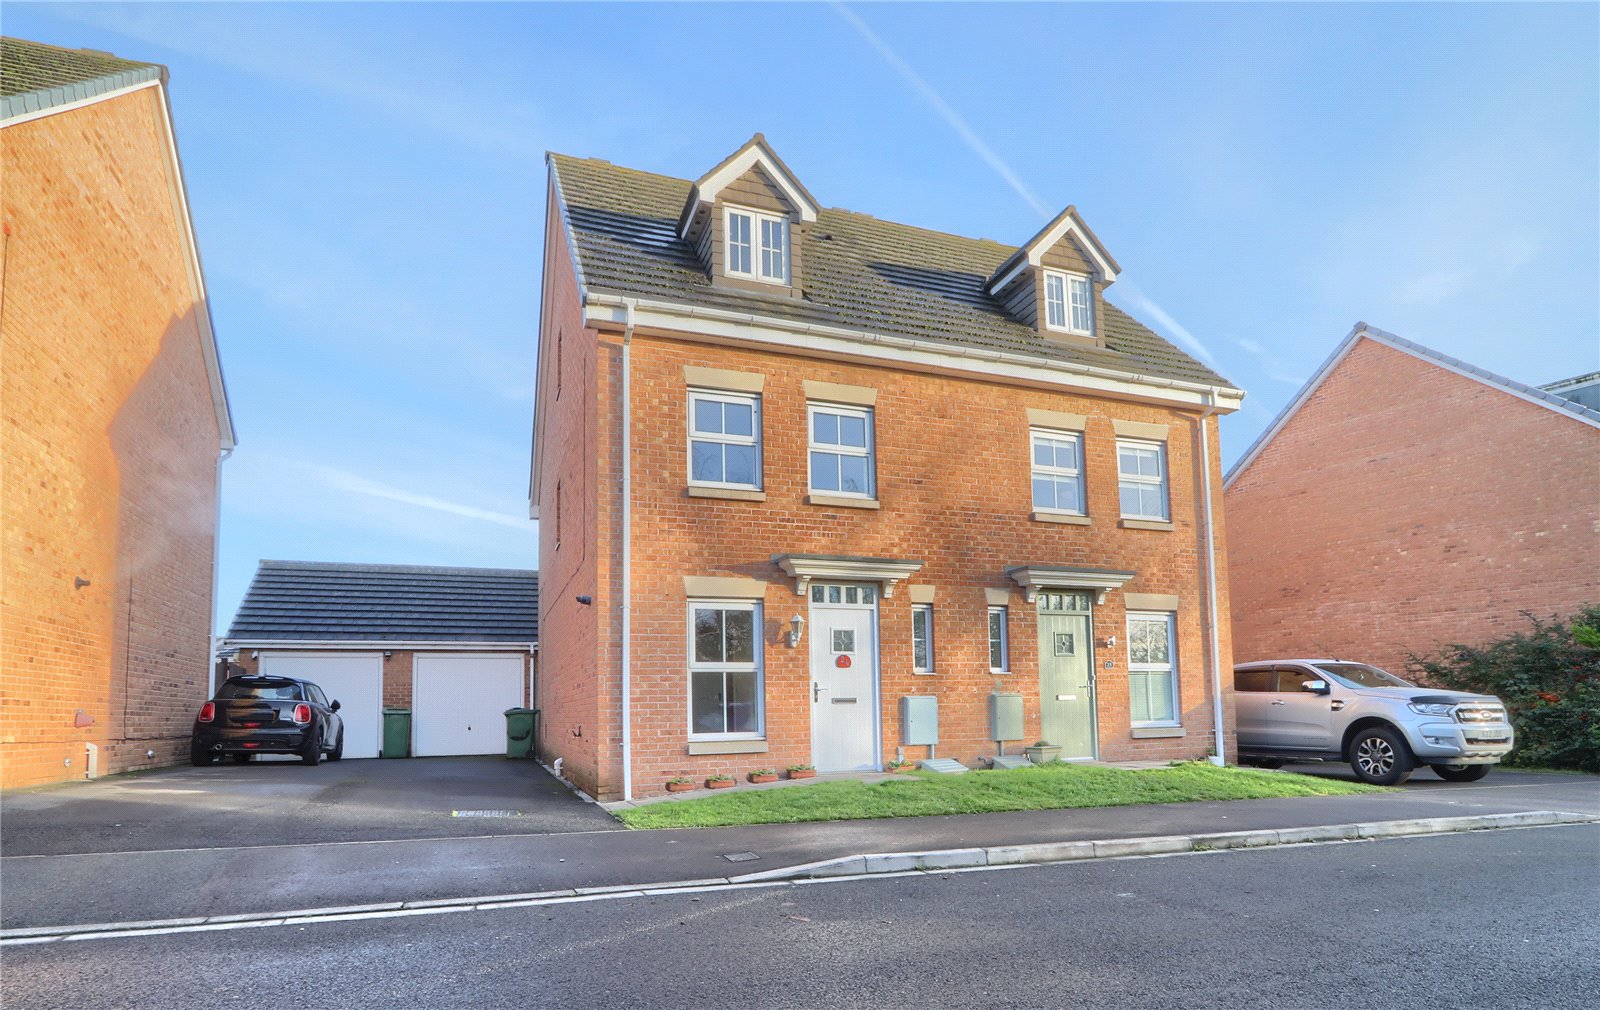 3 bed house for sale in Pennyroyal Road, Stockton-on-Tees - Property Image 1